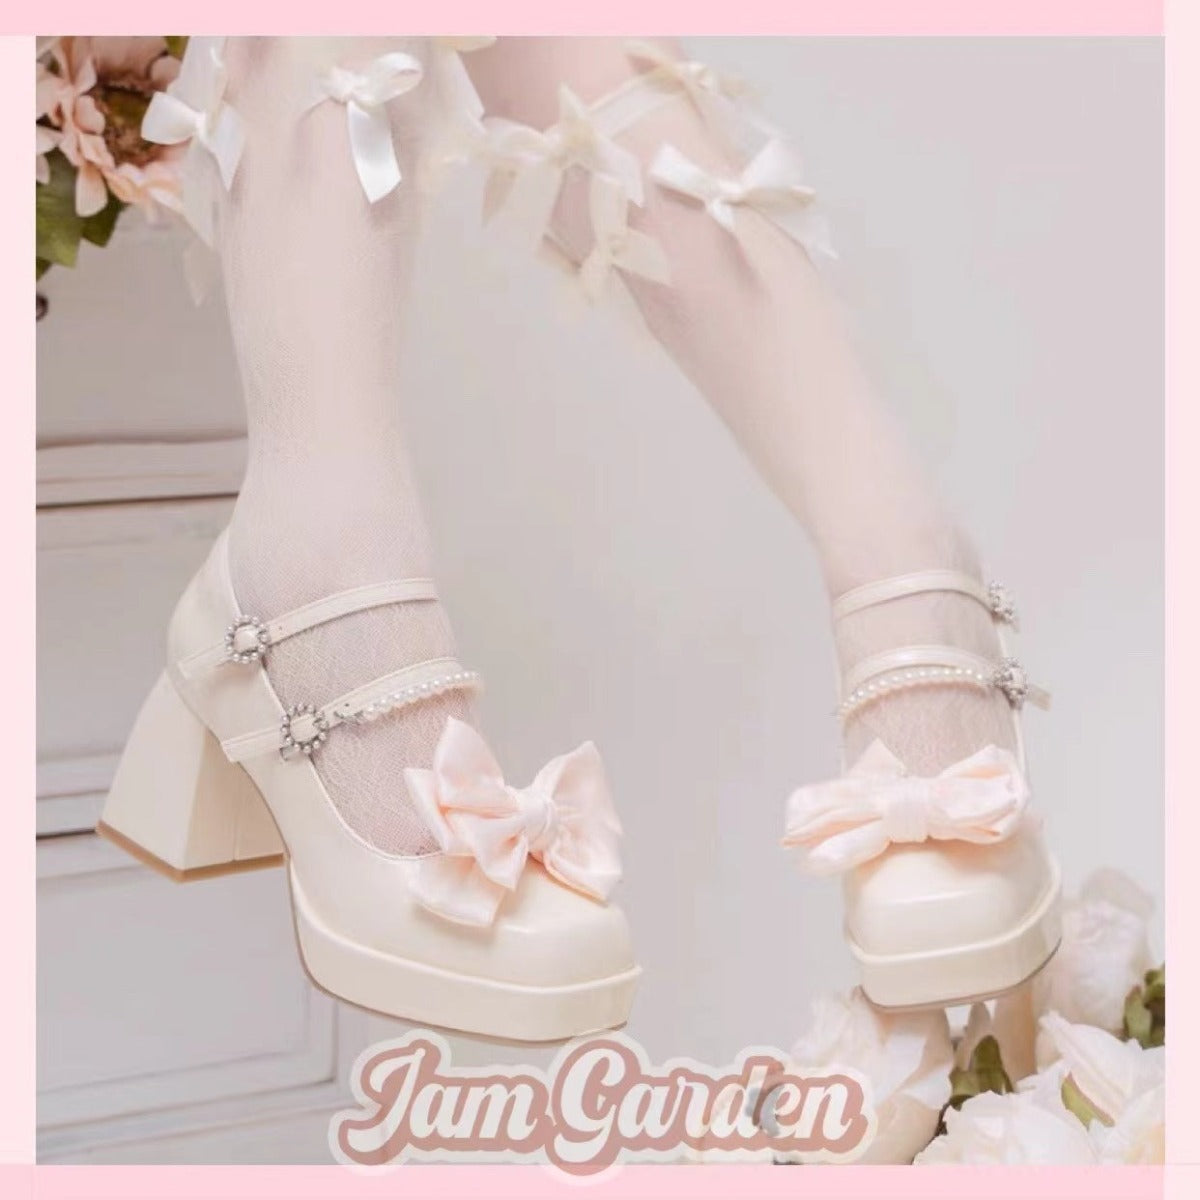 Lolita Low French Mary Jane Elegant Shoes Fairy High Heels